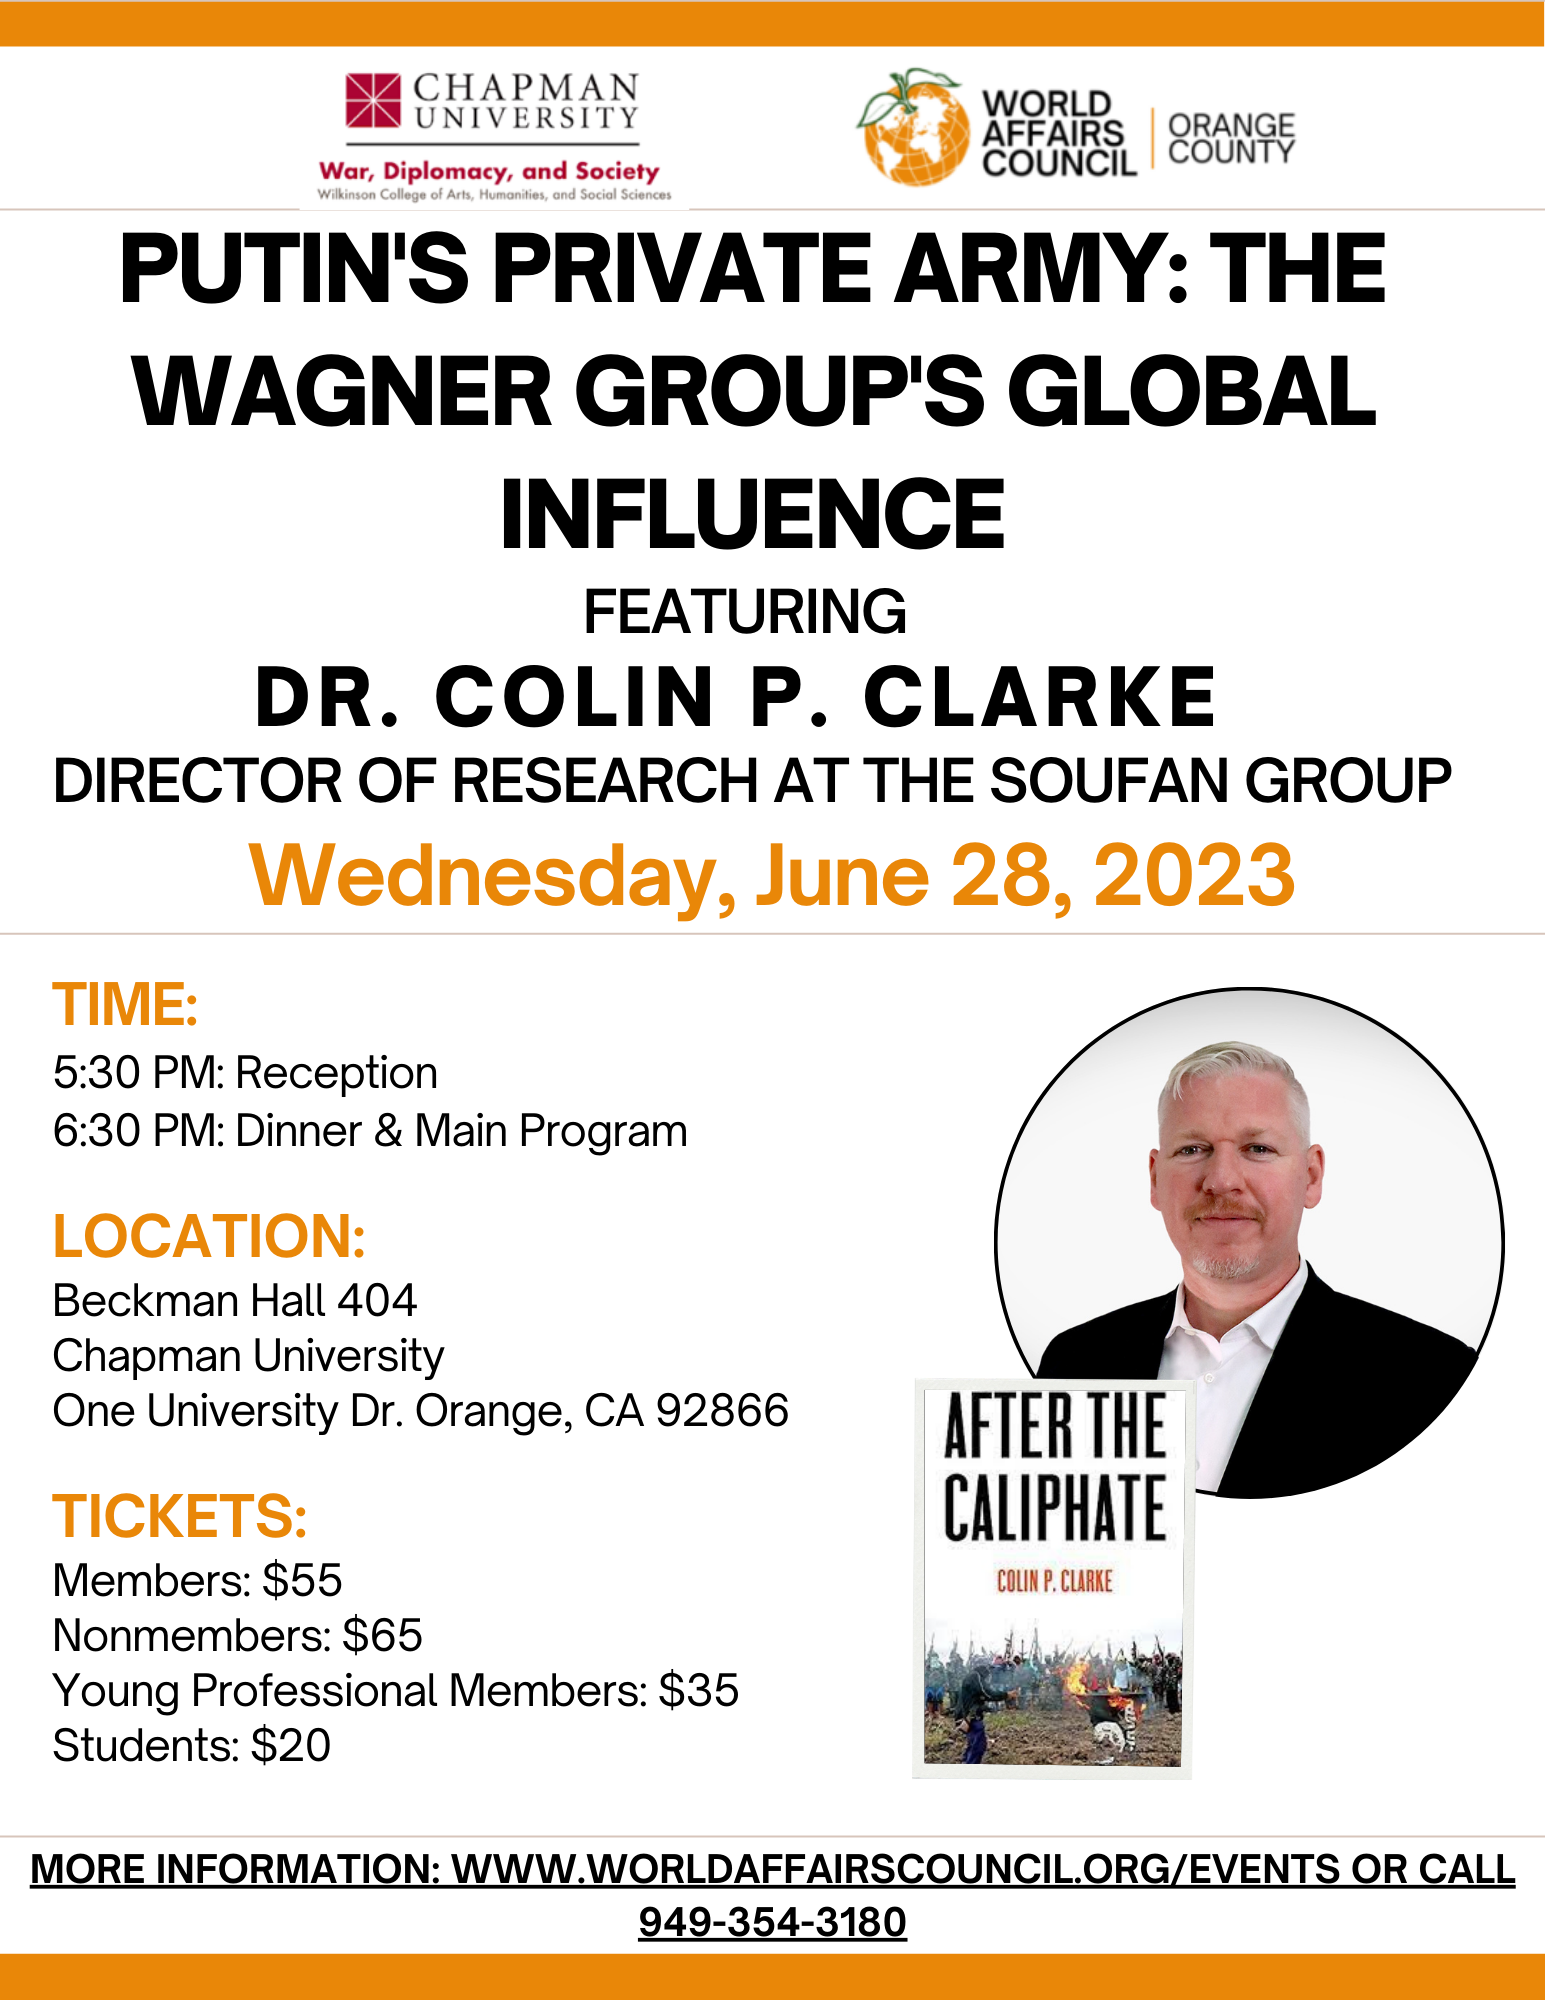 Putin's Private Army: The Wagner Group's Global Influence